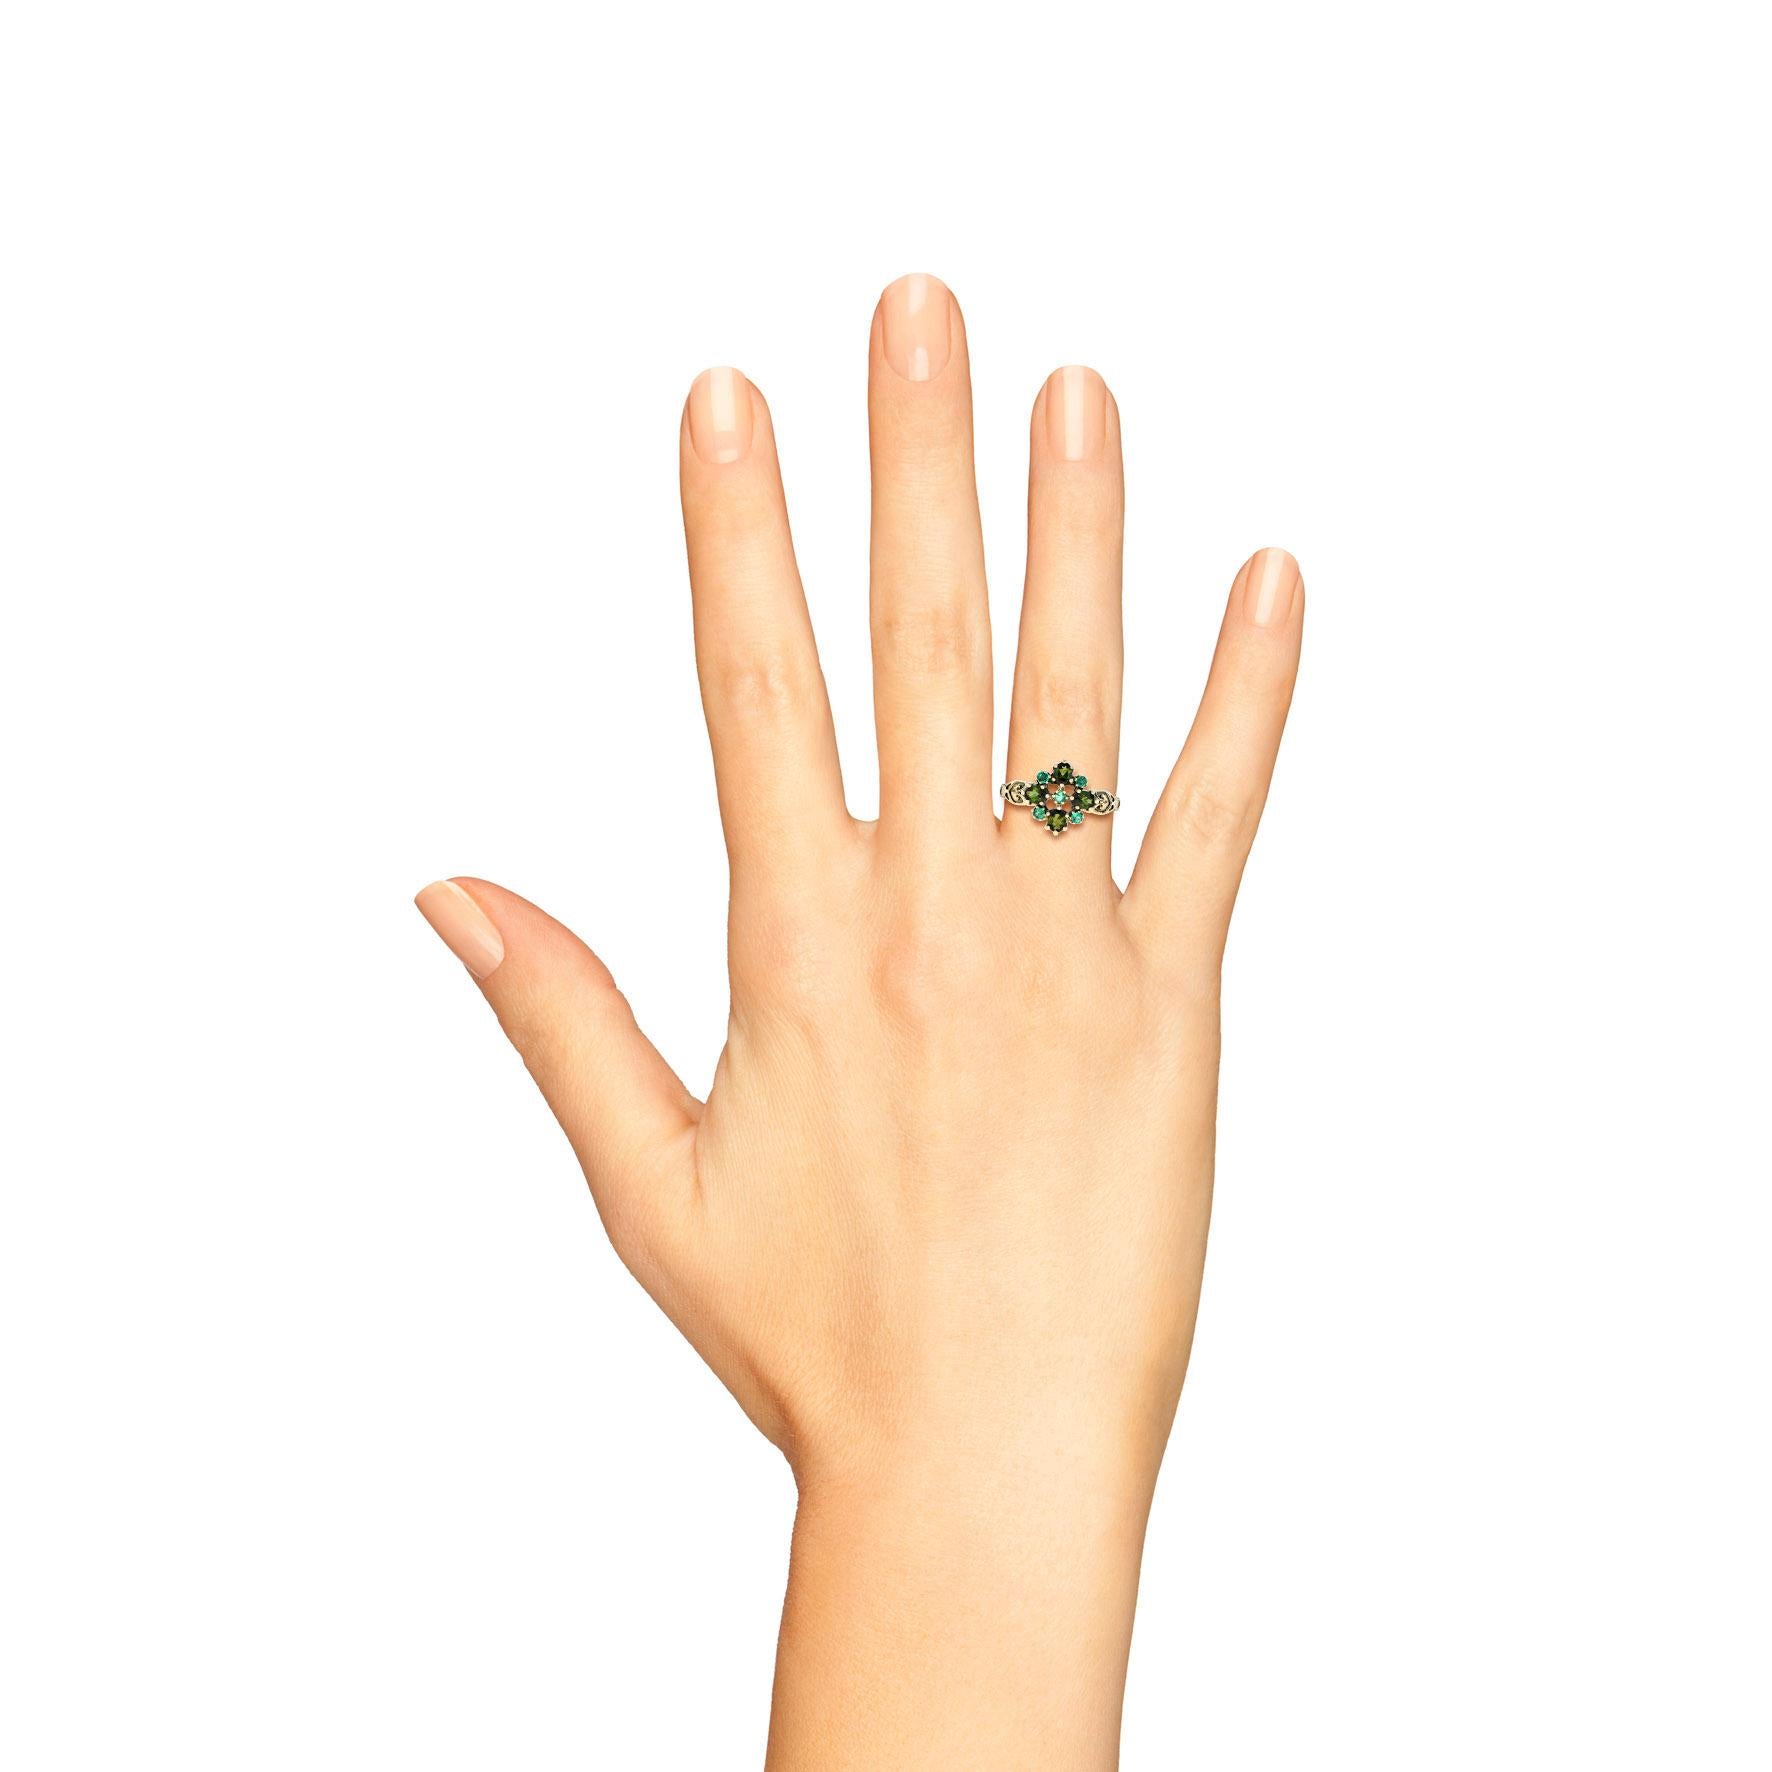 Vintage green tourmaline and emerald ring is a classic design that would be a wonderful addition to your fine jewelry collection. A perfect piece to wear all year long, and the floral motif would be wonderful this season with a beautiful spring or